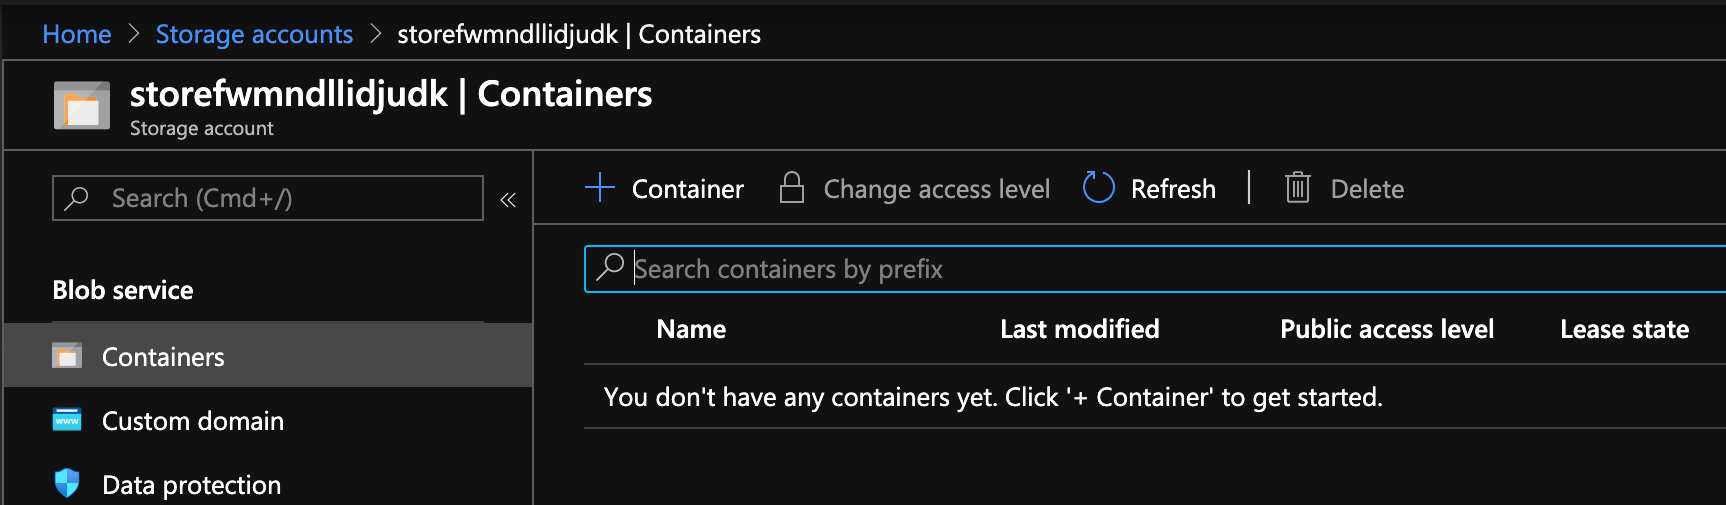 No existing containers